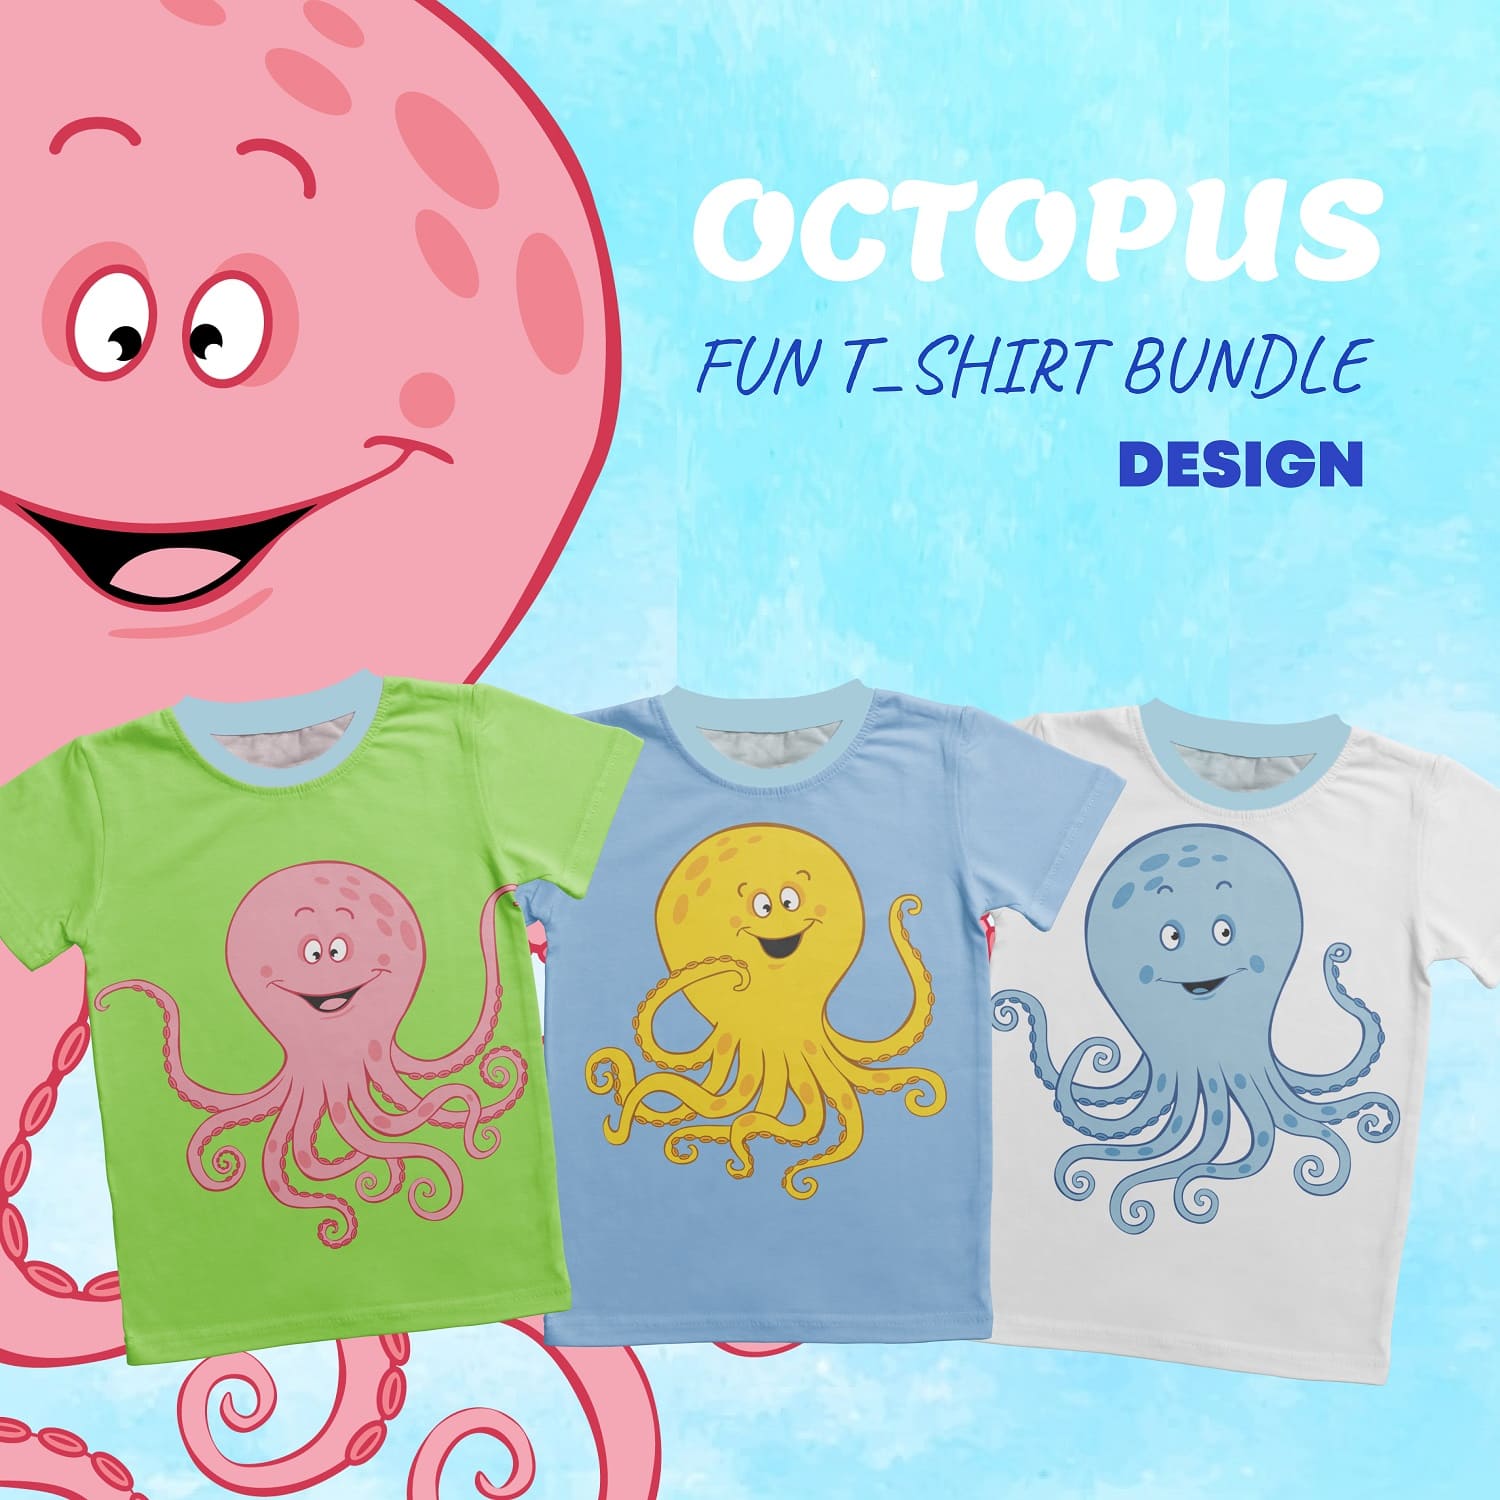 Set of funny t-shirt designs with octopus title picture.